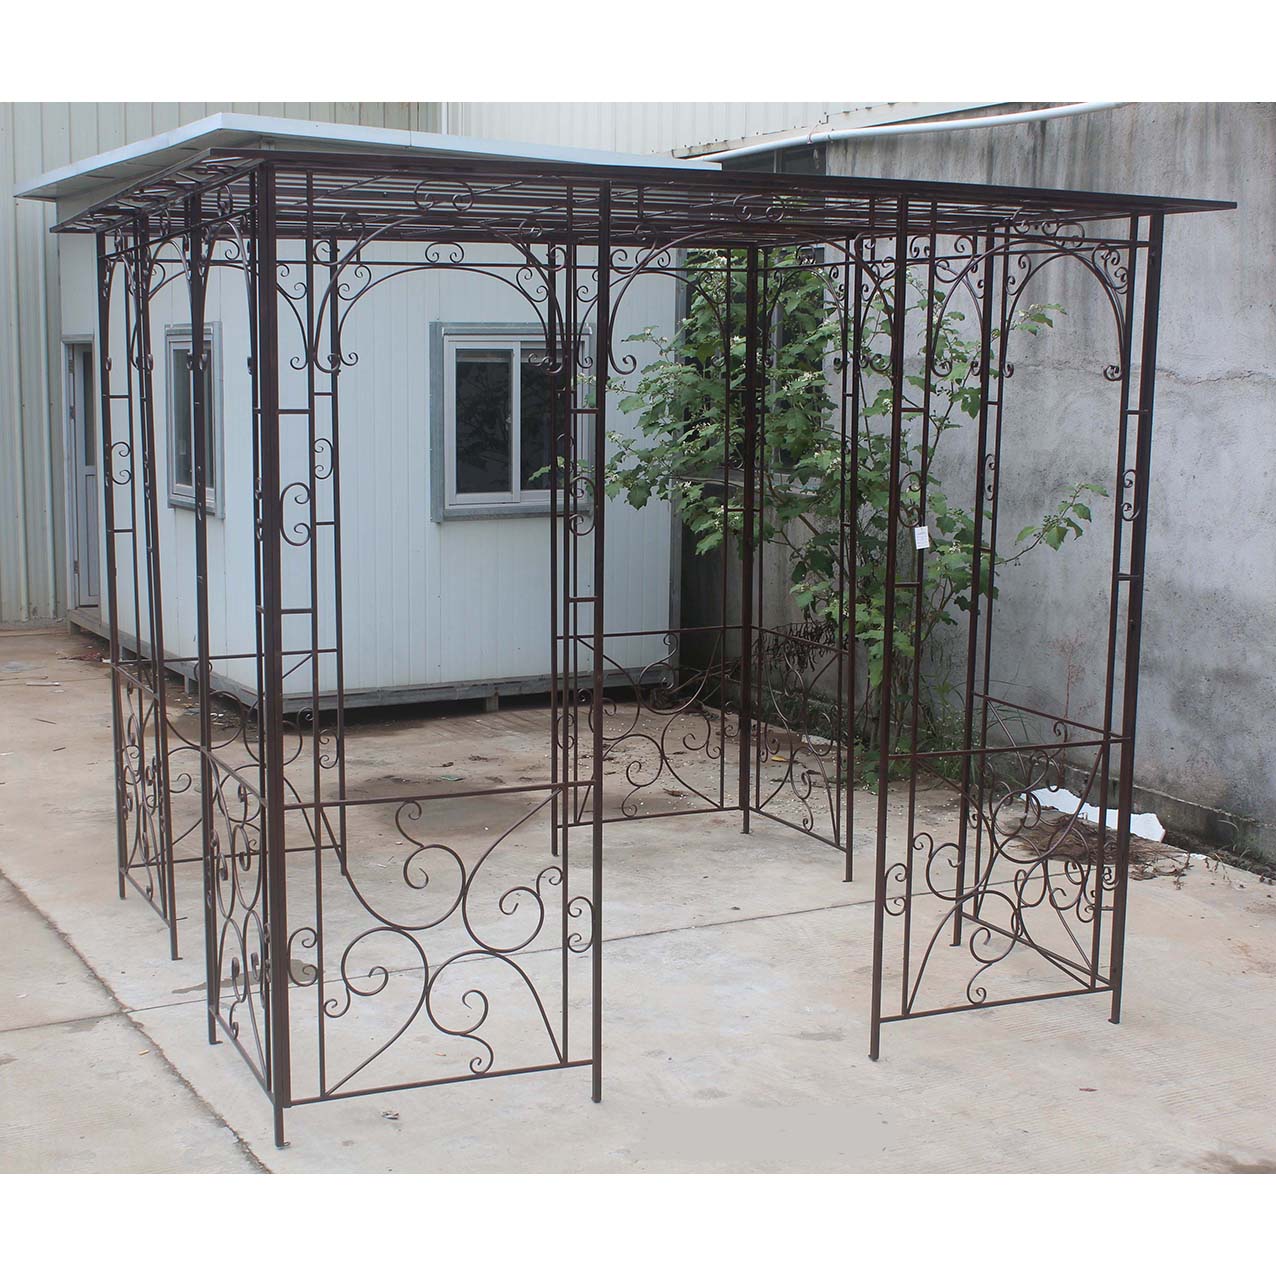 Square metal mongolian yurt with curved metal scroll